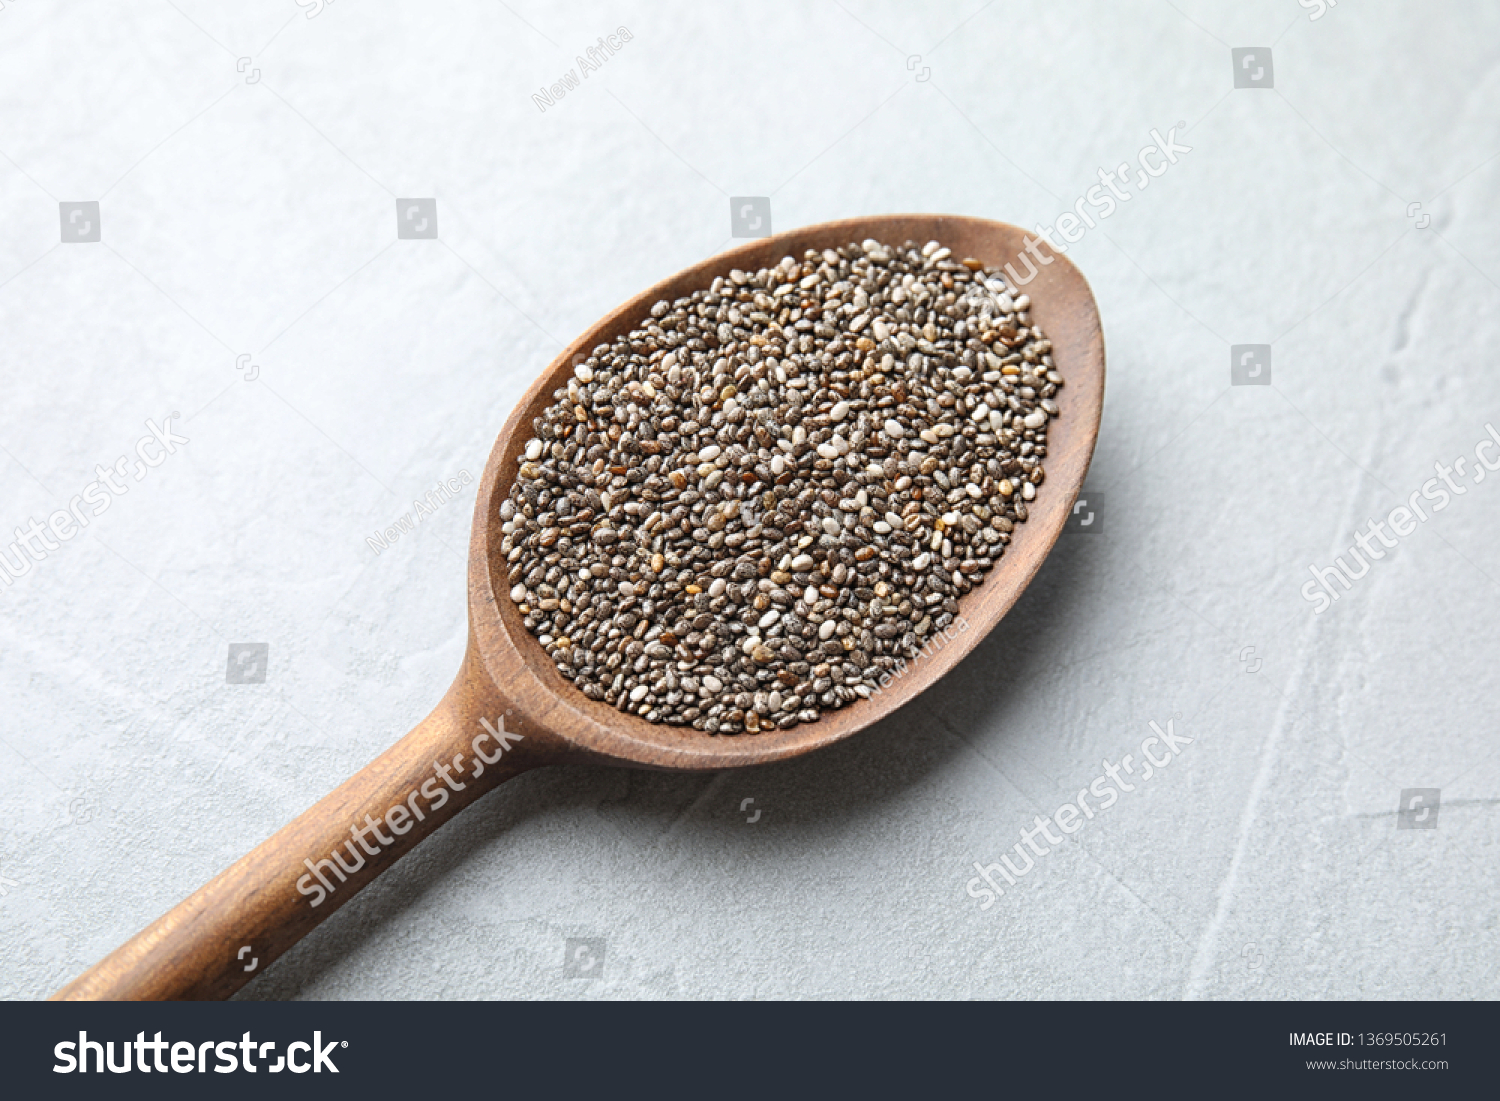 Spoon with chia seeds on light background, closeup #1369505261